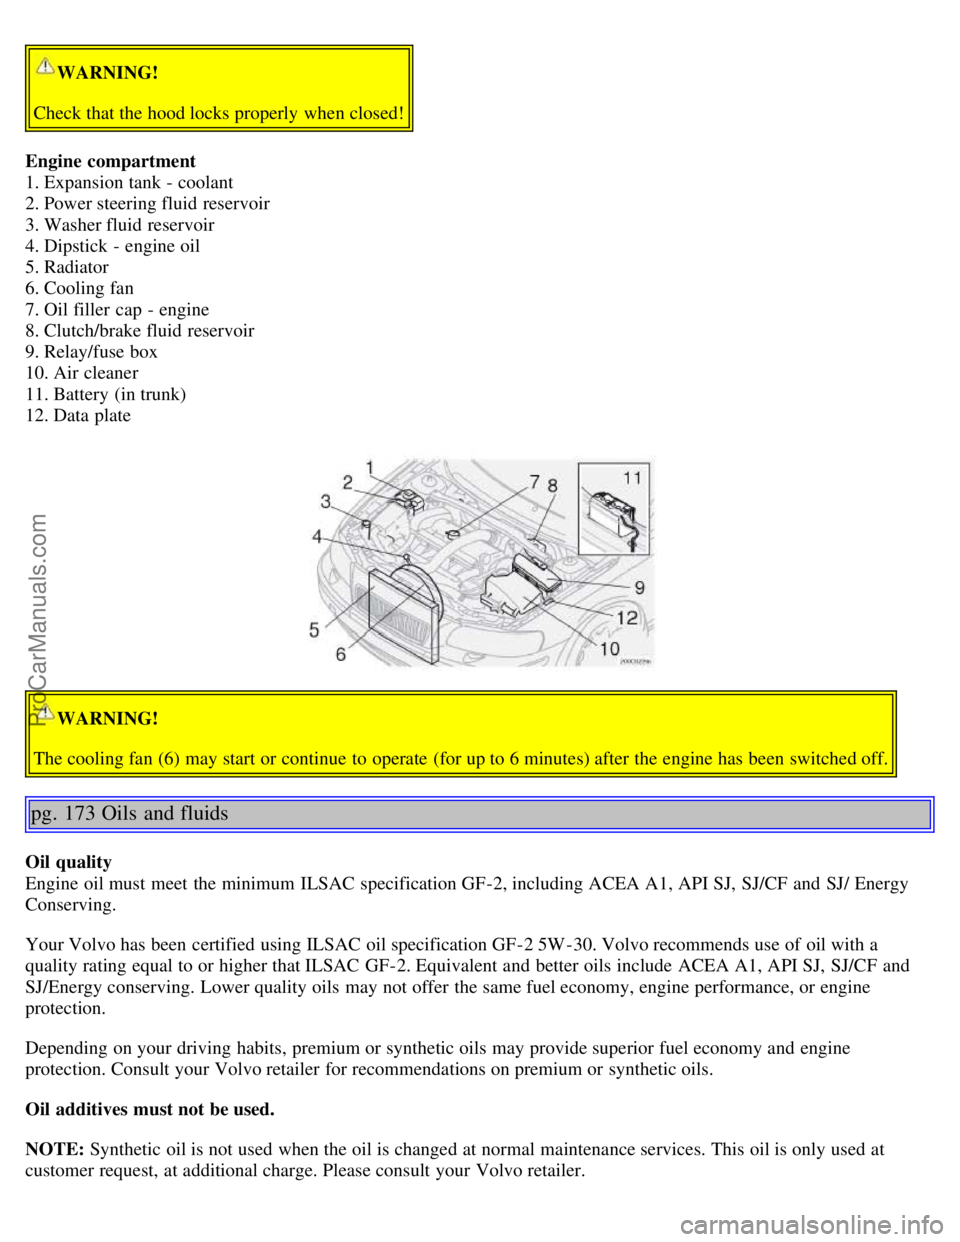 VOLVO S60 2002  Owners Manual WARNING!
Check that the hood locks properly when closed!
Engine  compartment  
1. Expansion tank - coolant
2. Power steering fluid reservoir
3. Washer fluid reservoir
4. Dipstick - engine oil
5. Radia